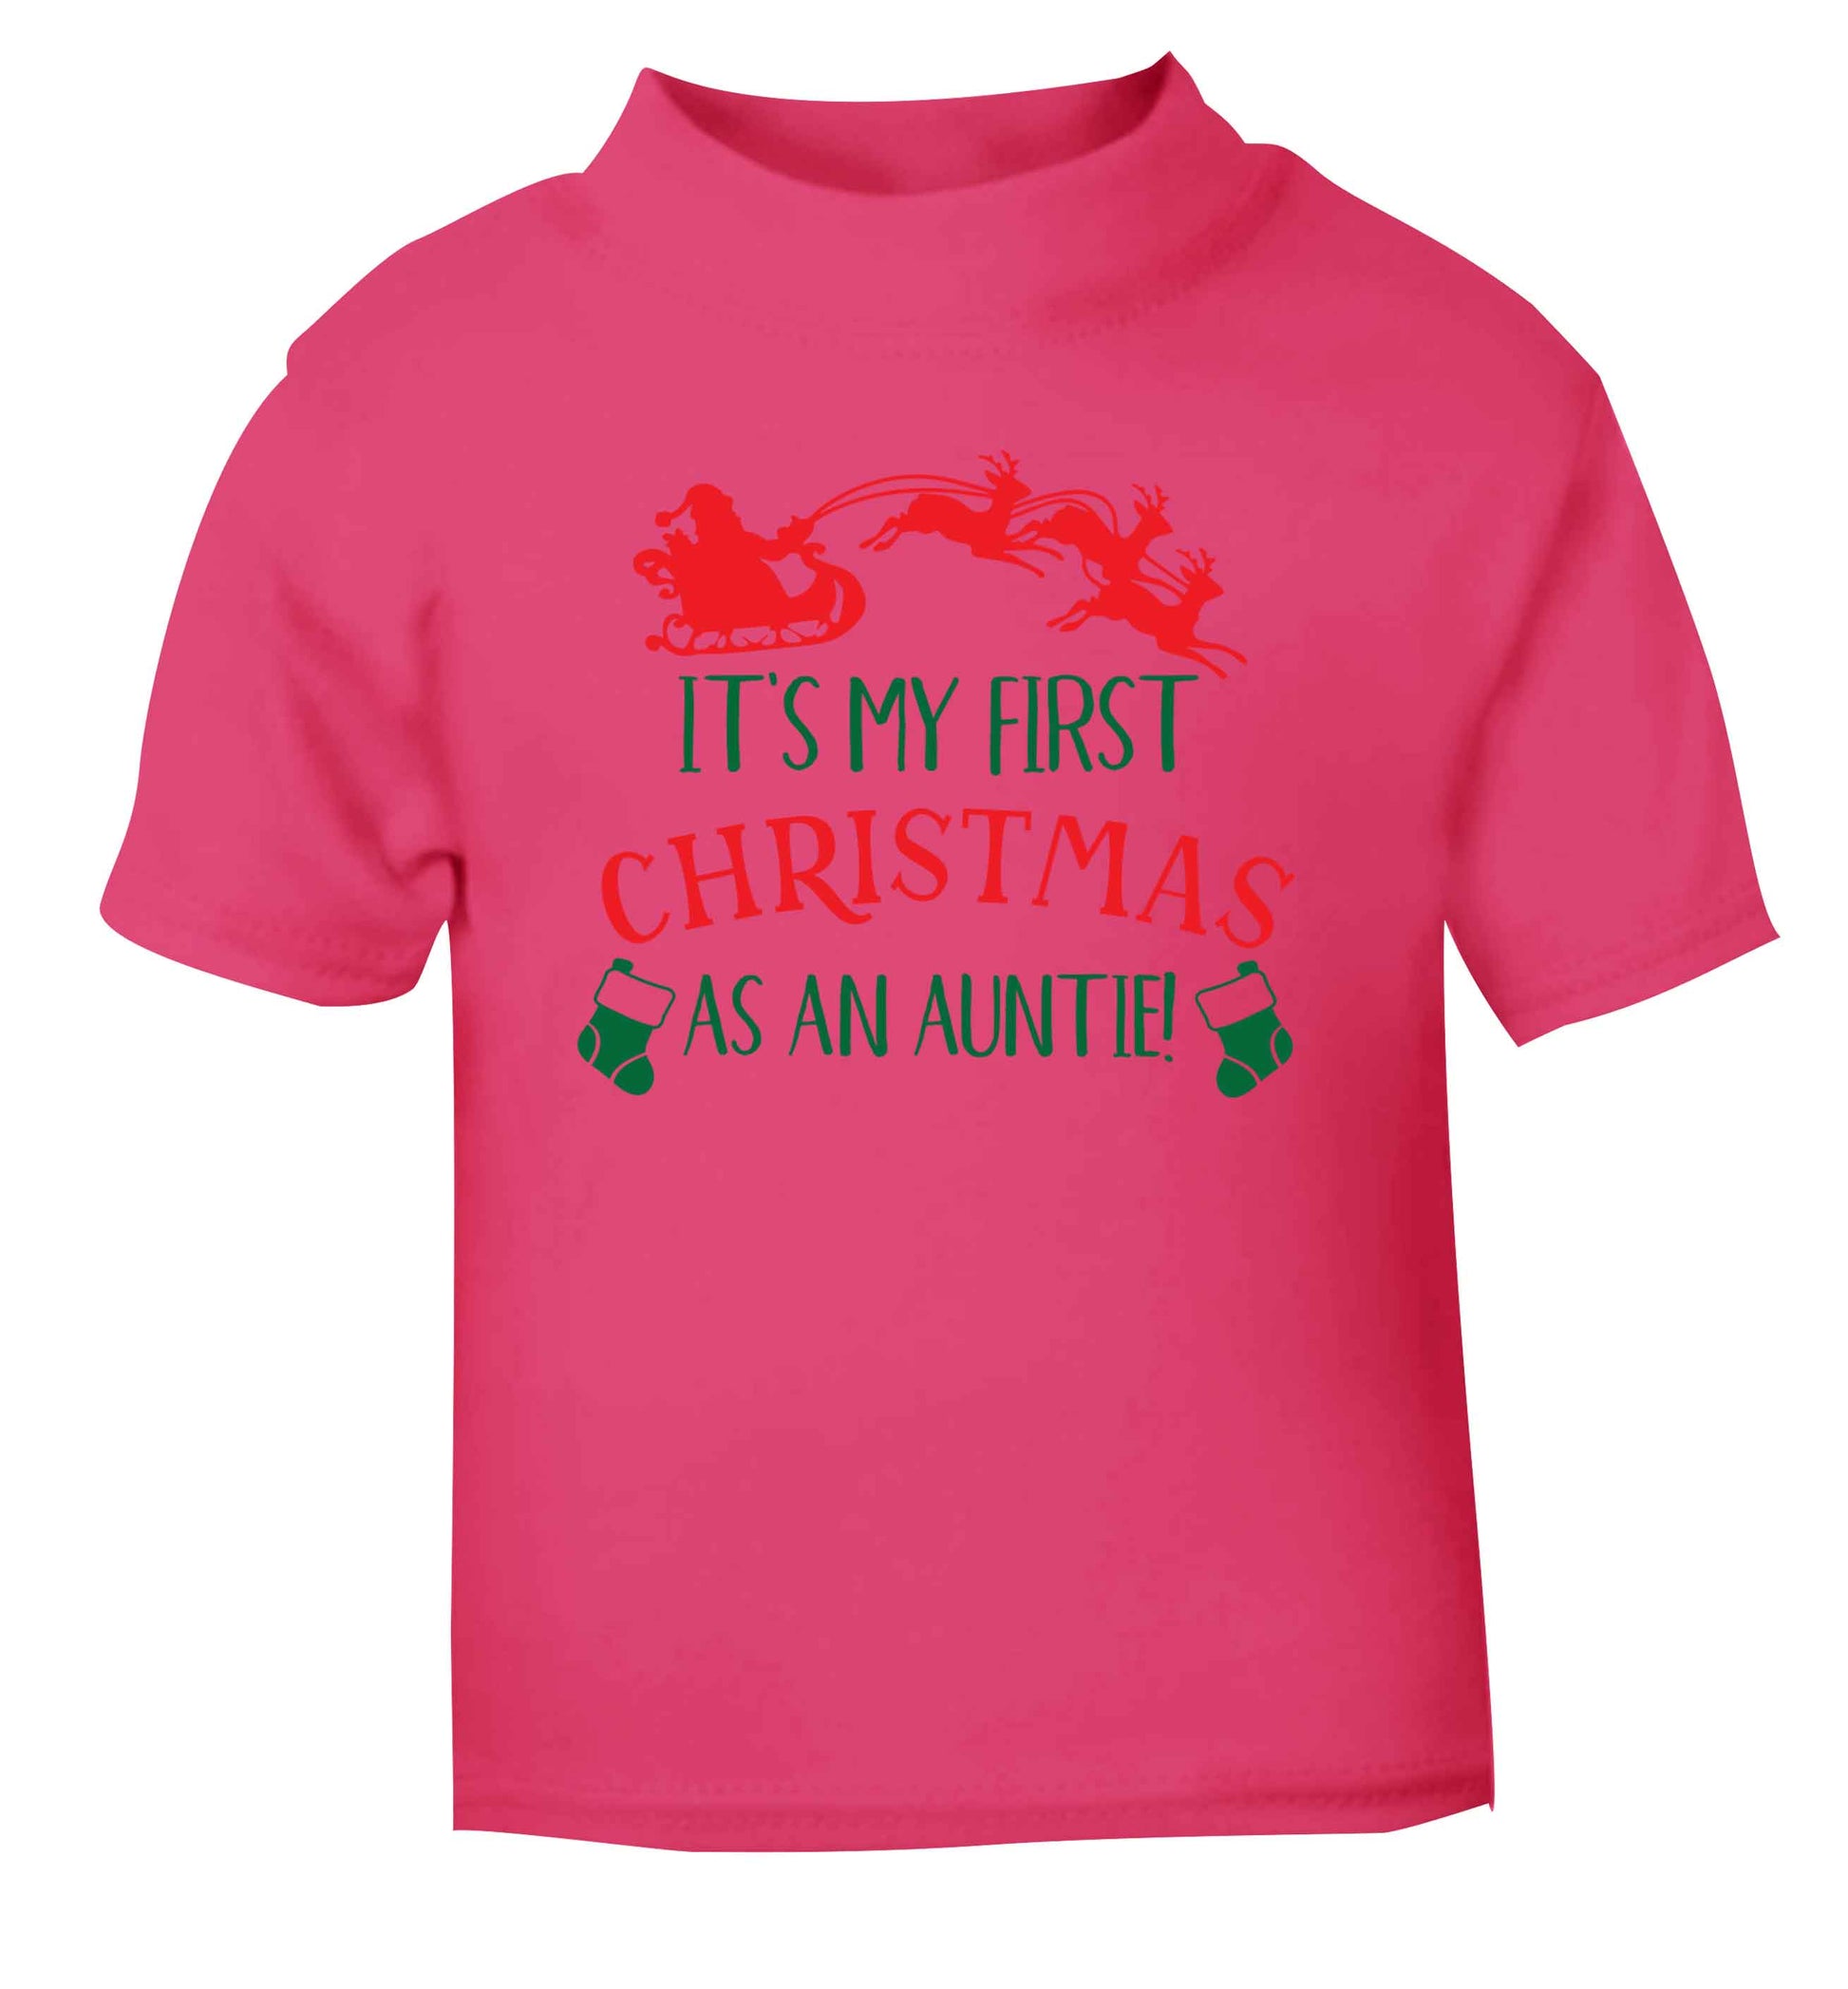 It's my first Christmas as an auntie! pink Baby Toddler Tshirt 2 Years